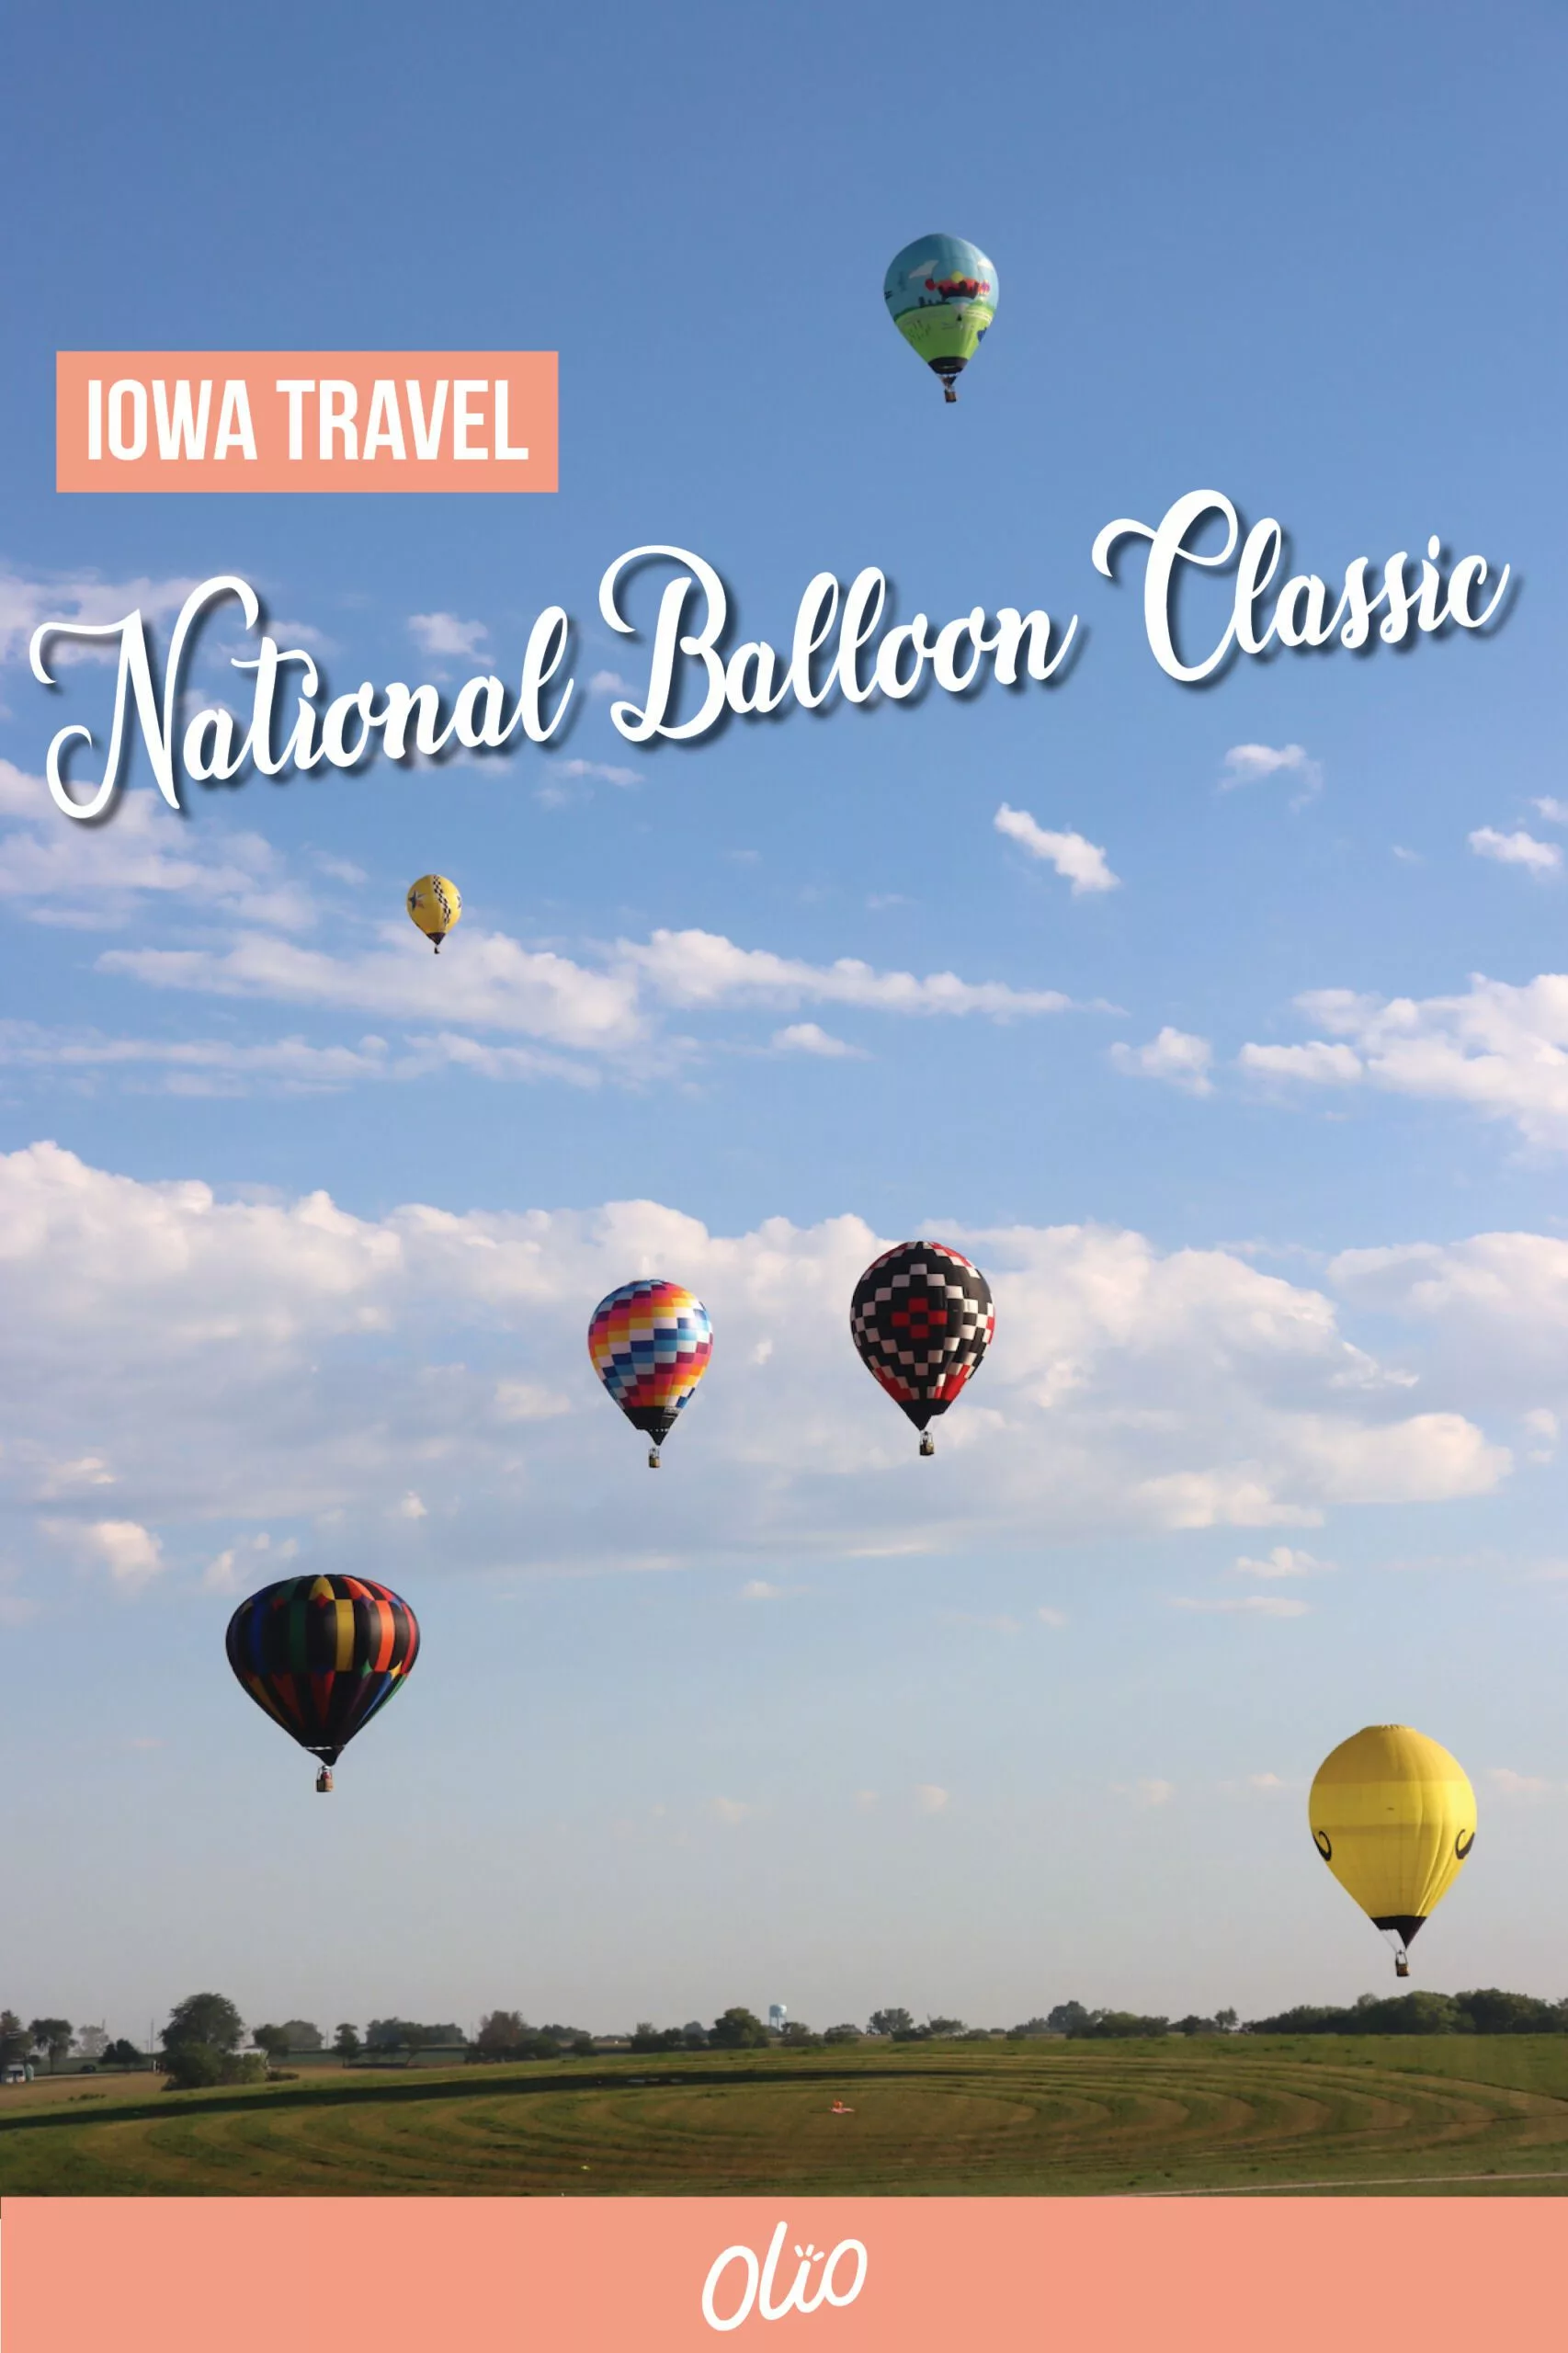 #Ad Let your sense of adventure take flight at the annual National Balloon Classic in Indianola, Iowa! More than 100 balloons fill the sky over the course of this nine-day event that’s sure to captivate travelers and balloonists alike. Learn everything you need to know about the festival, plan a visit to the National Balloon Museum and more. #ThisIsIowa @IowaTourism